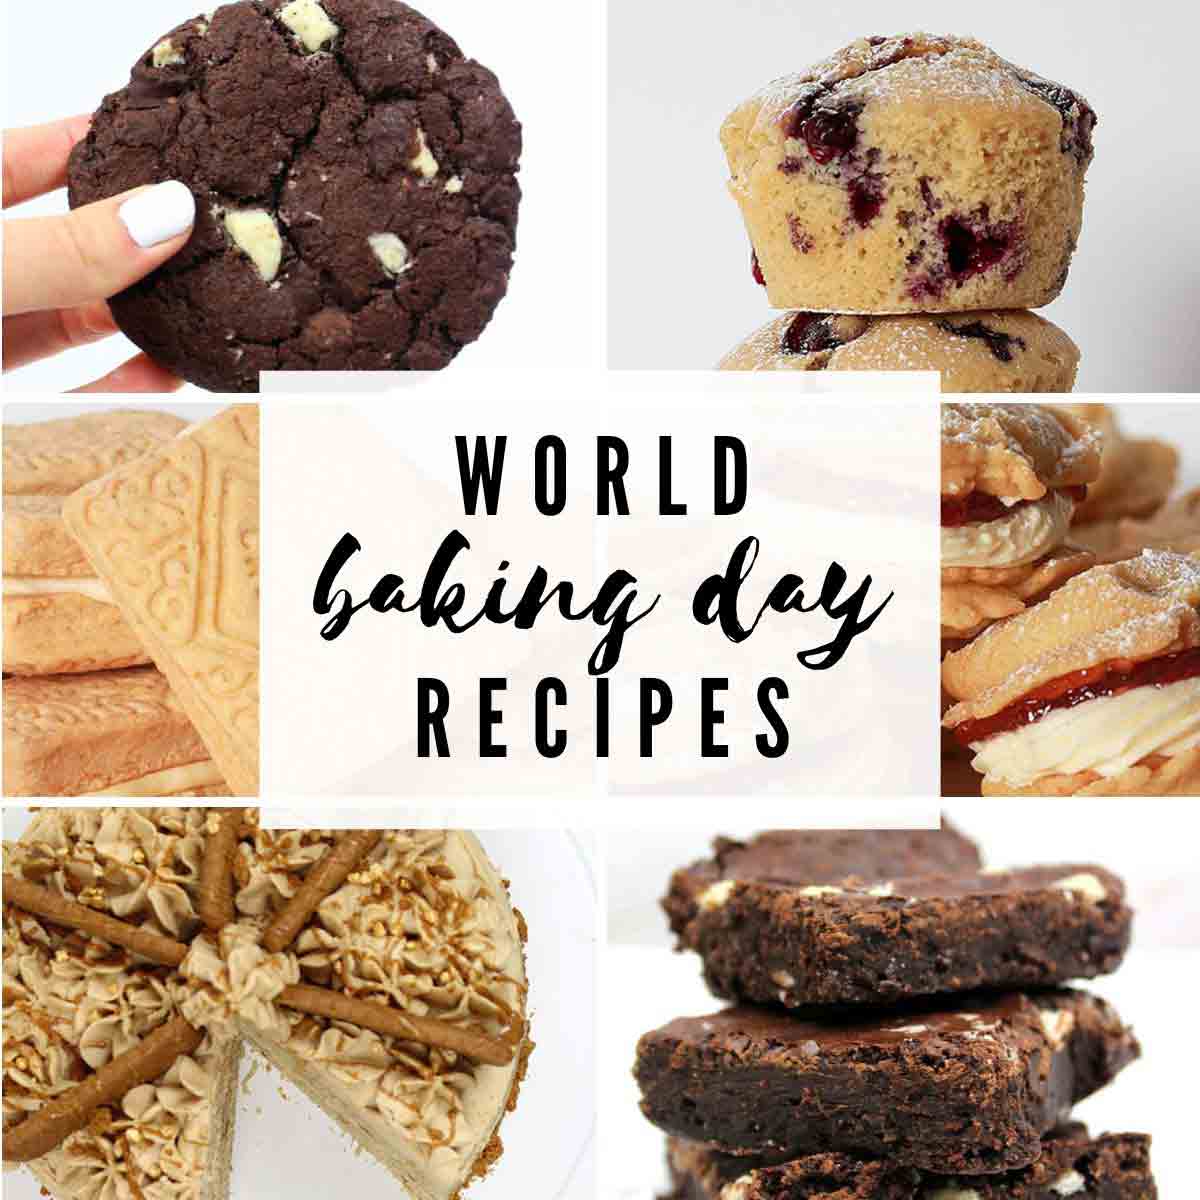 World Baking Day Image Collage Of Desserts